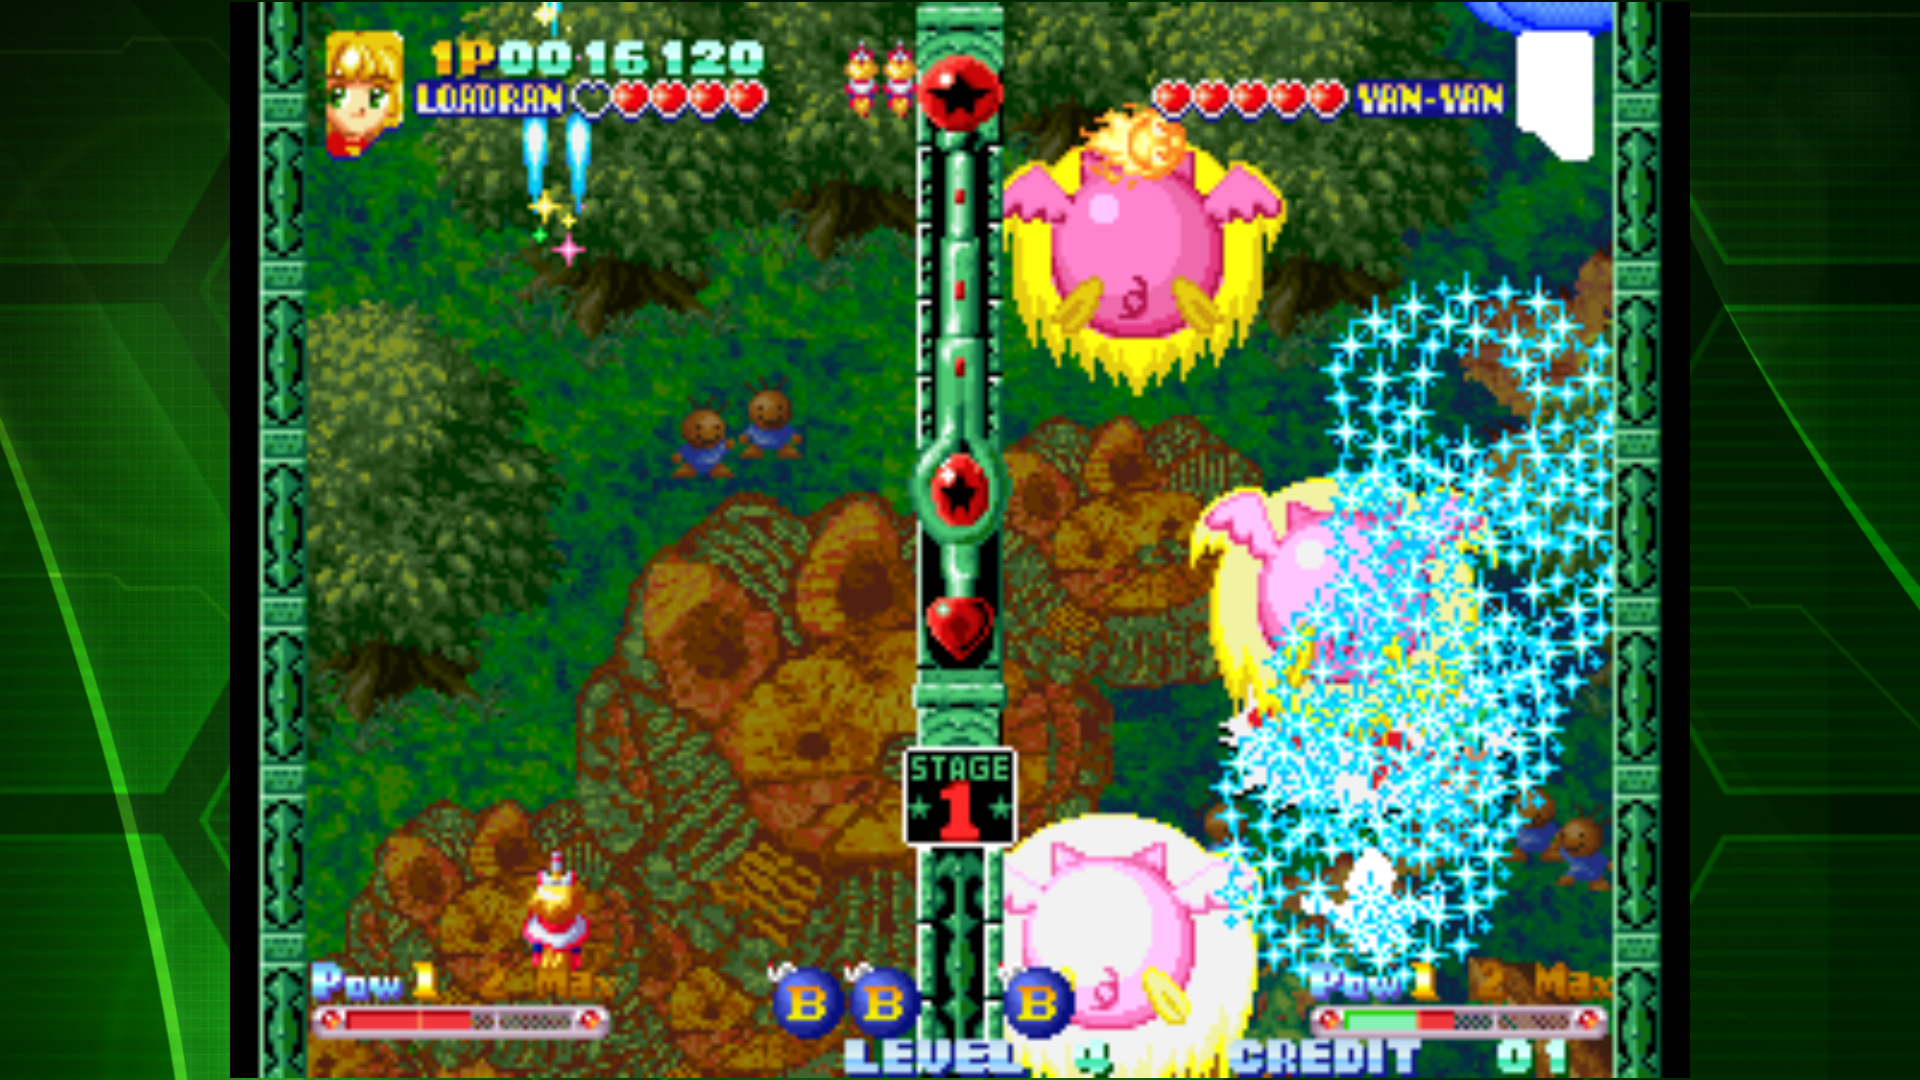 Competitive Shoot ‘Em Up Twinkle Star Sprites From SNK and Hamster Is Out Now on iOS and Android As the Newest ACA NeoGeo Series Release